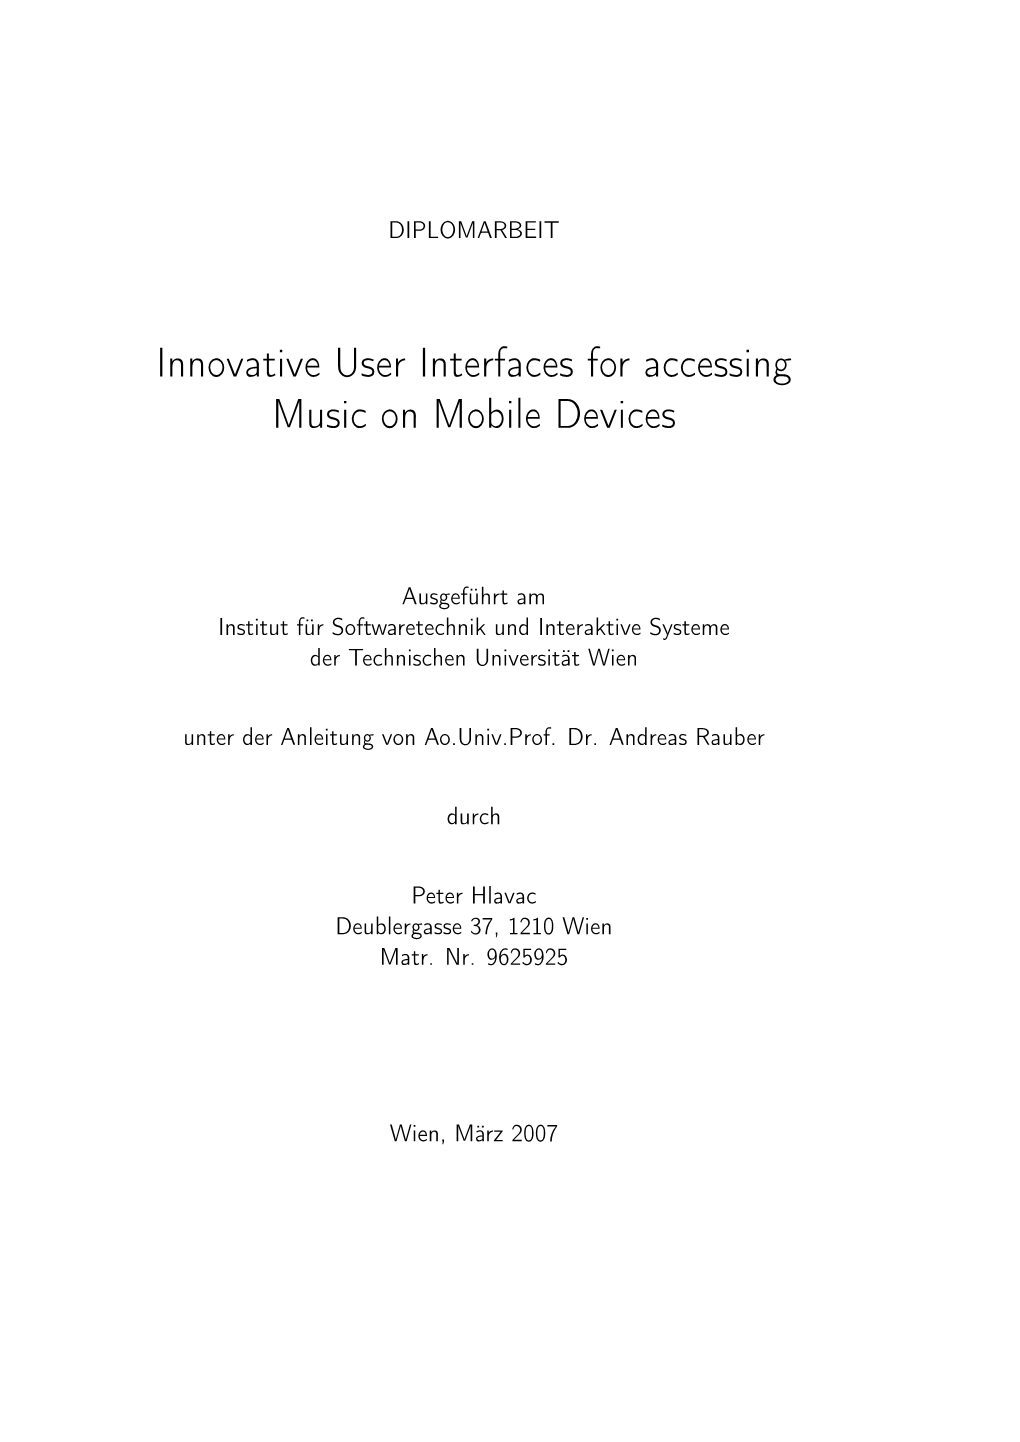 Innovative User Interfaces for Accessing Music on Mobile Devices